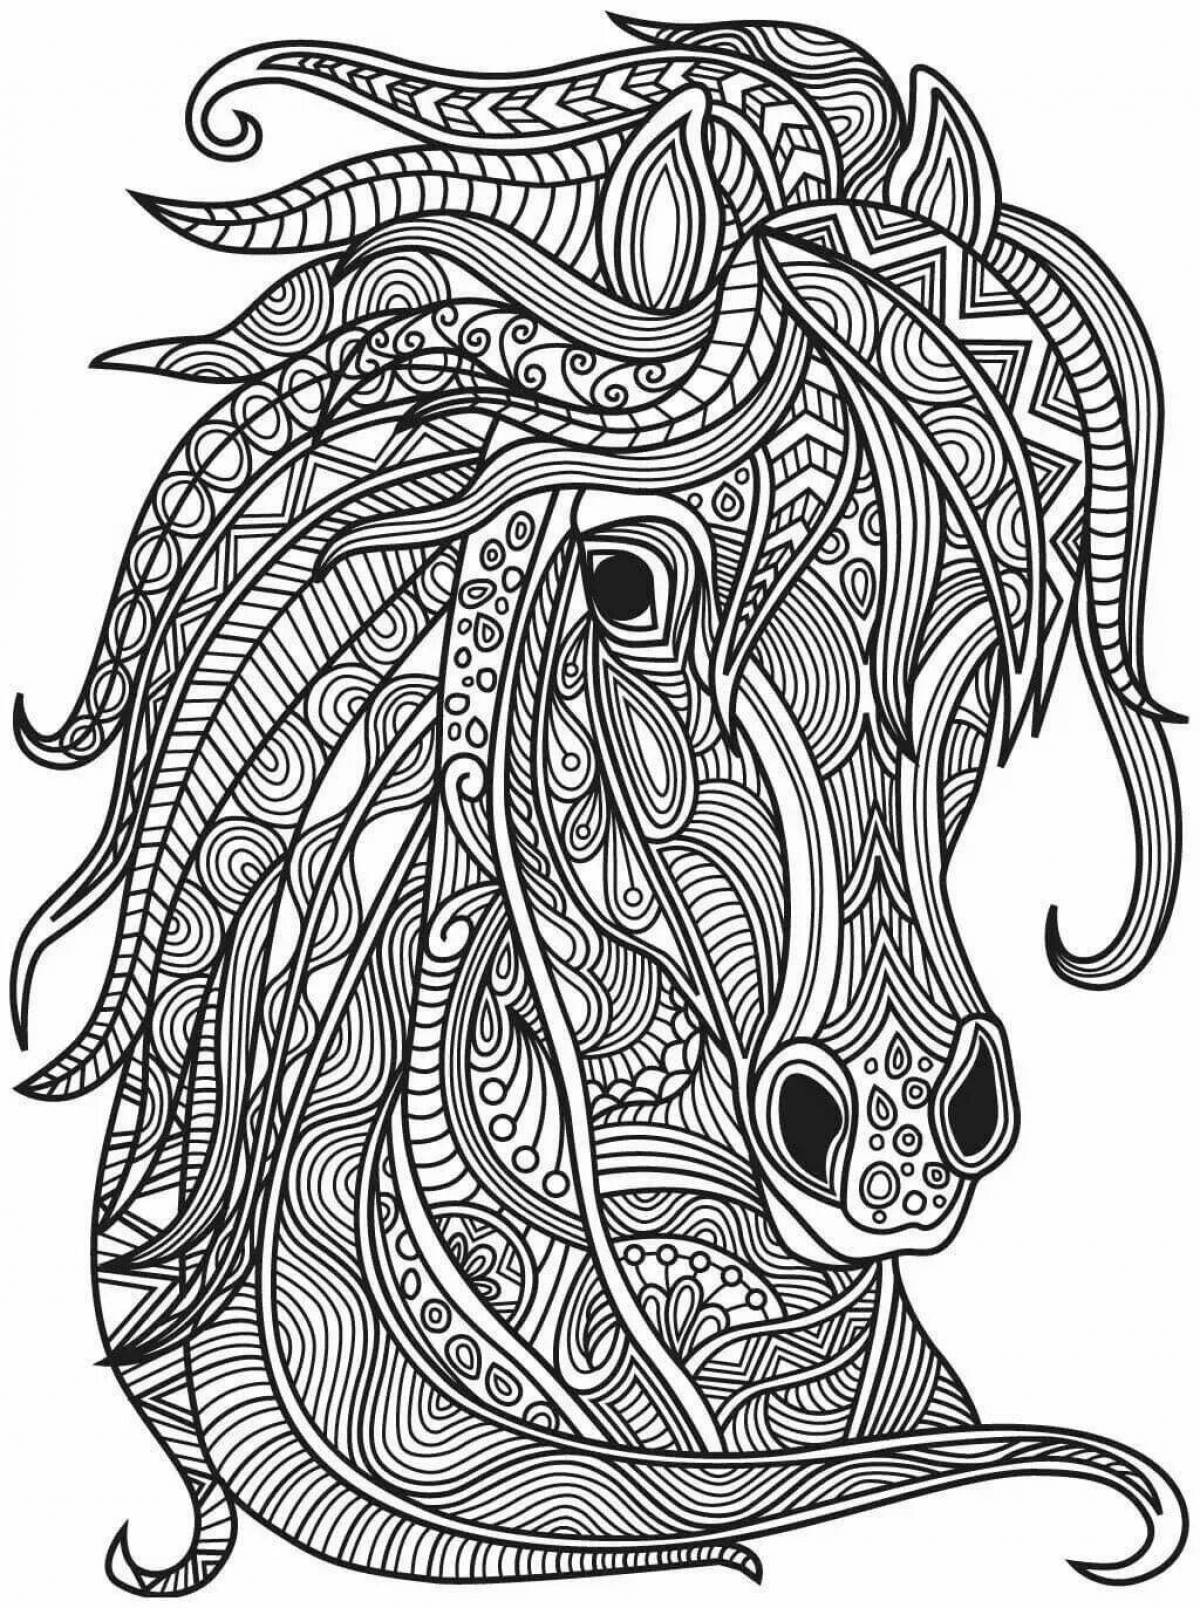 Lovely animal coloring pages